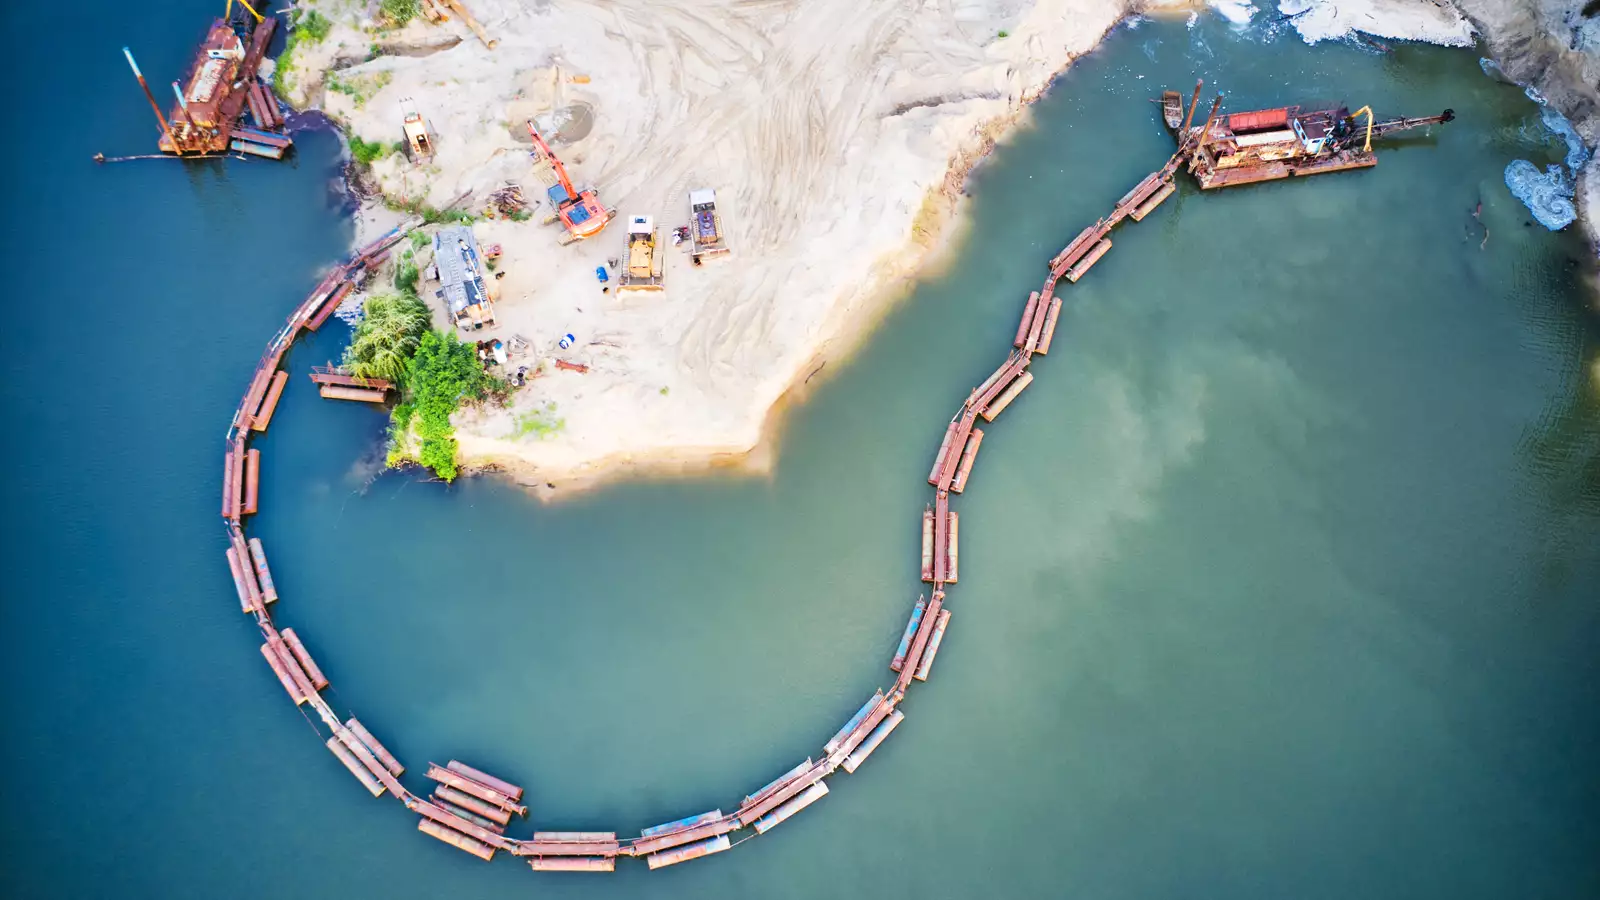 Sand mine on water aerial view